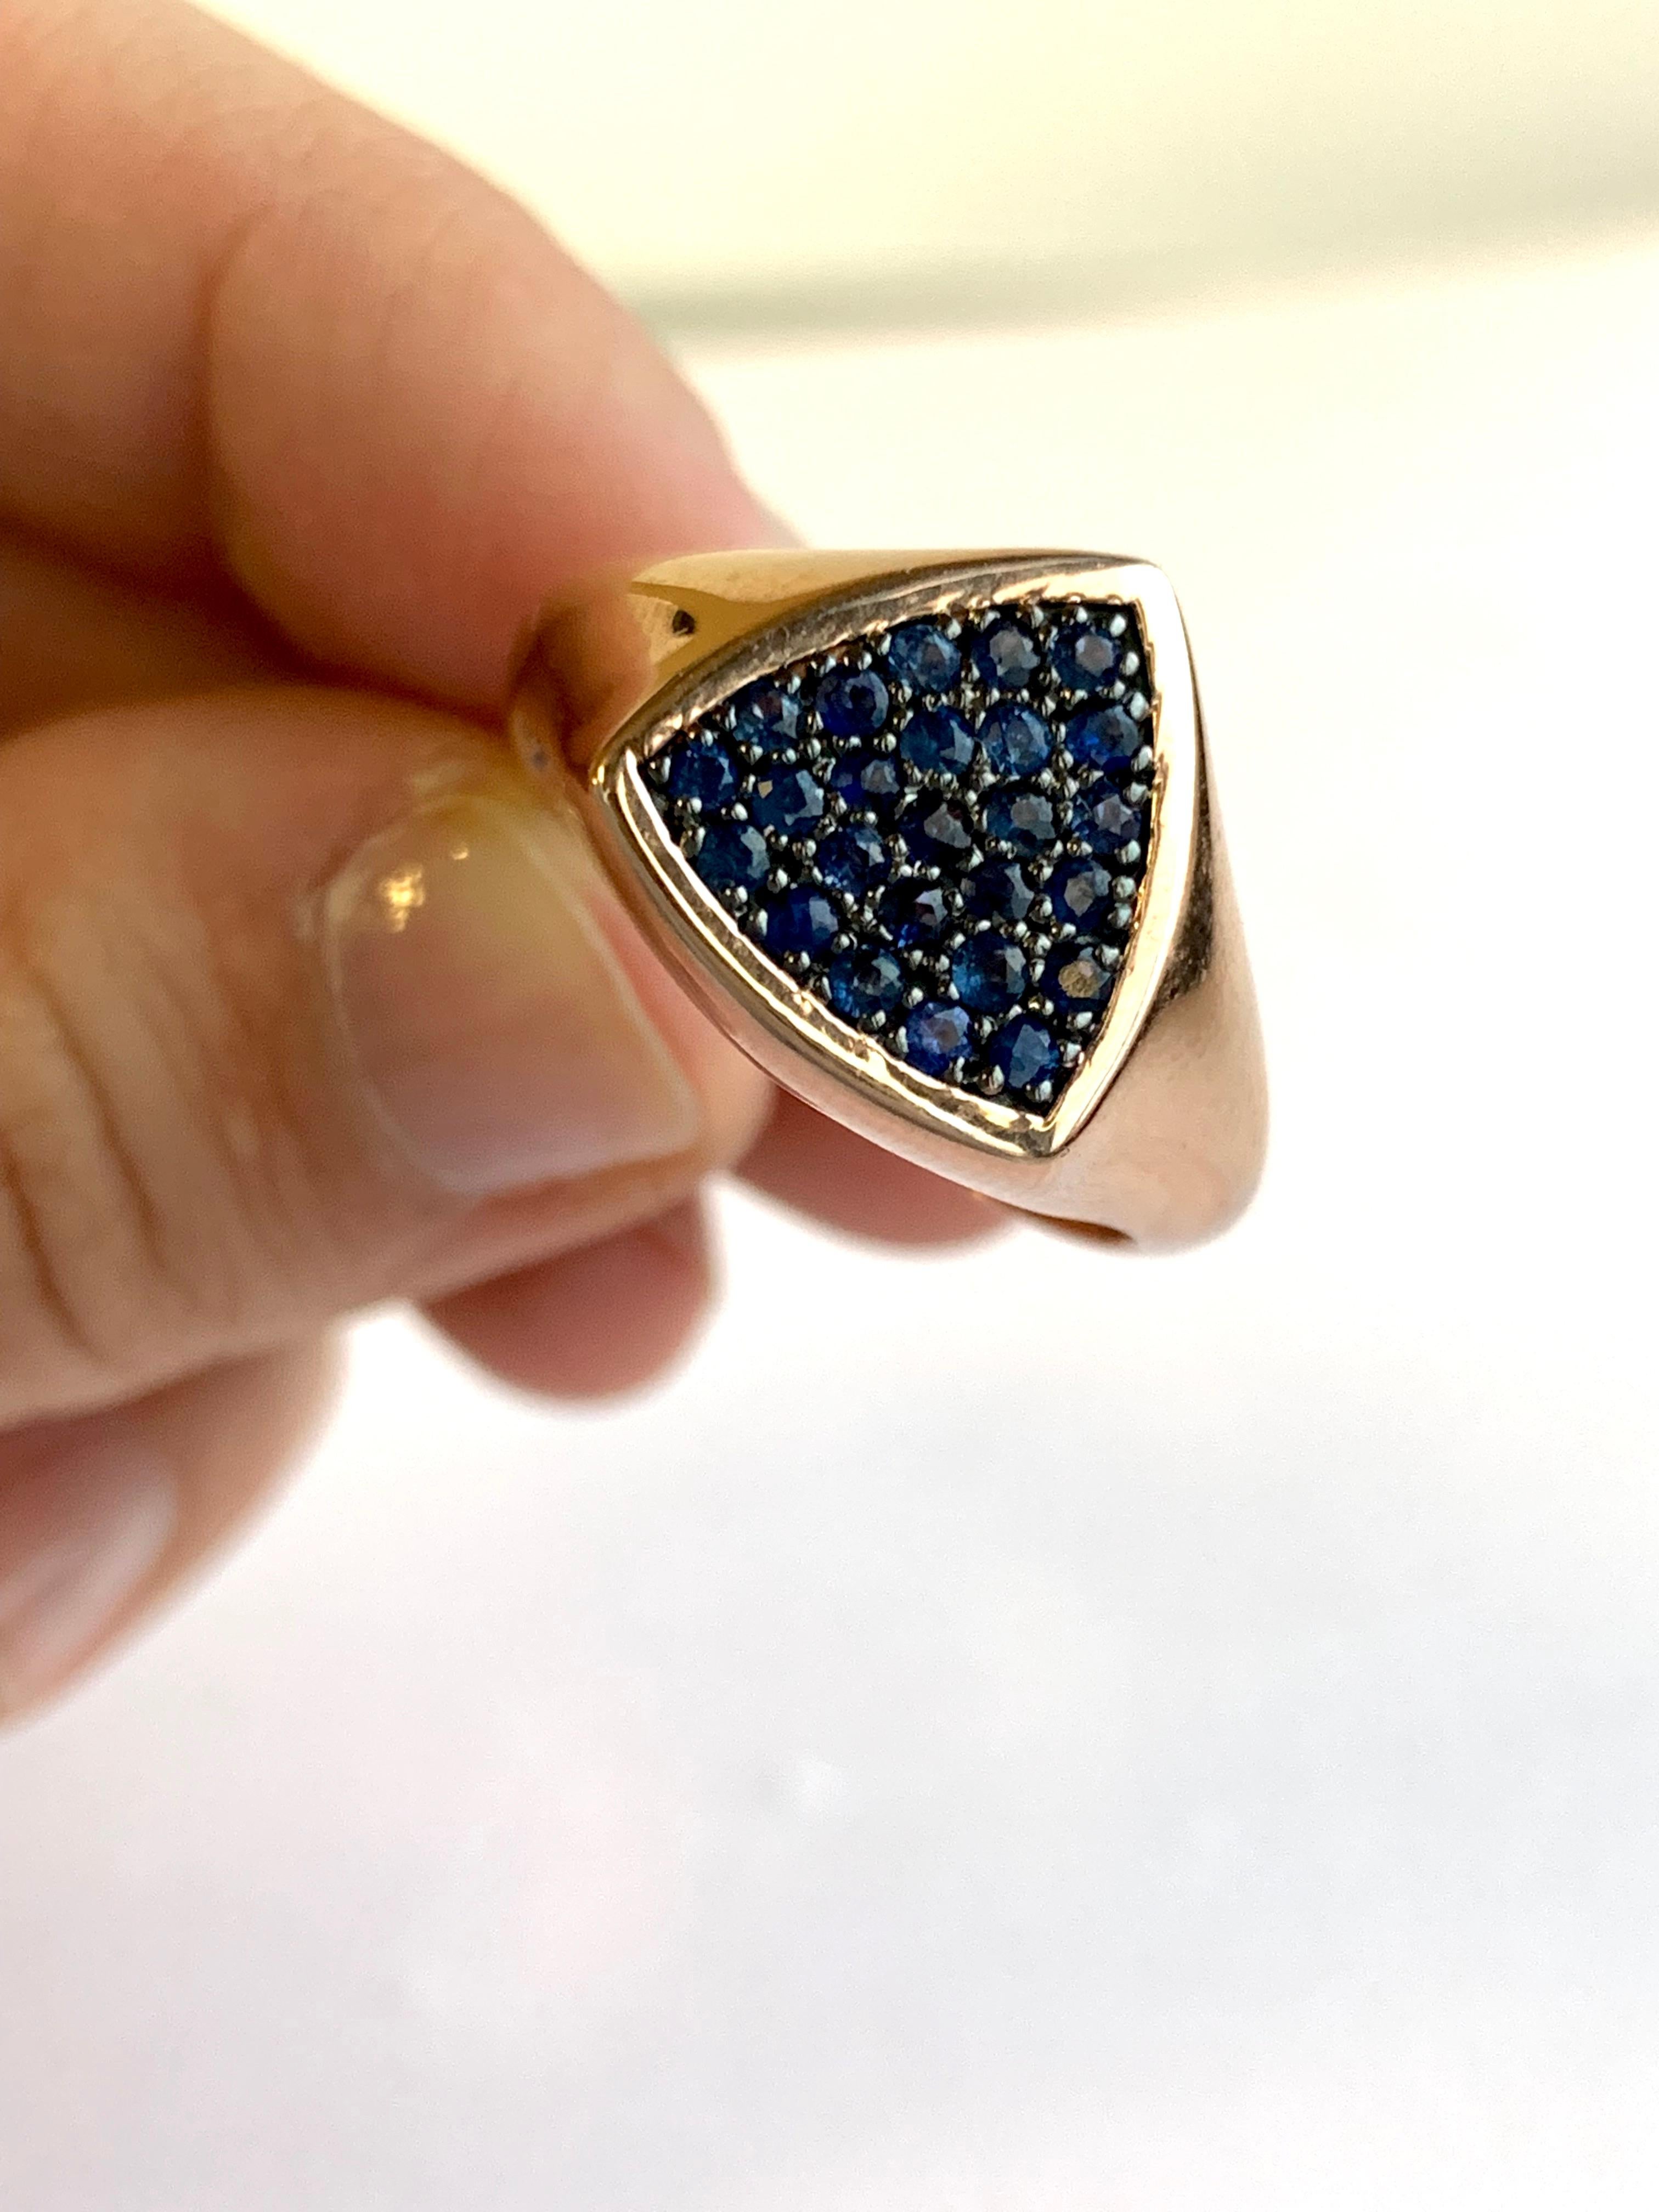 Material: 14k Rose Gold
Gemstones: 25 Round Sapphires at 0.61 Carats 
Ring Size: 9.75. Alberto offers complimentary sizing on all rings.

Fine one-of-a-kind craftsmanship meets incredible quality in this breathtaking piece of jewelry.

All Alberto